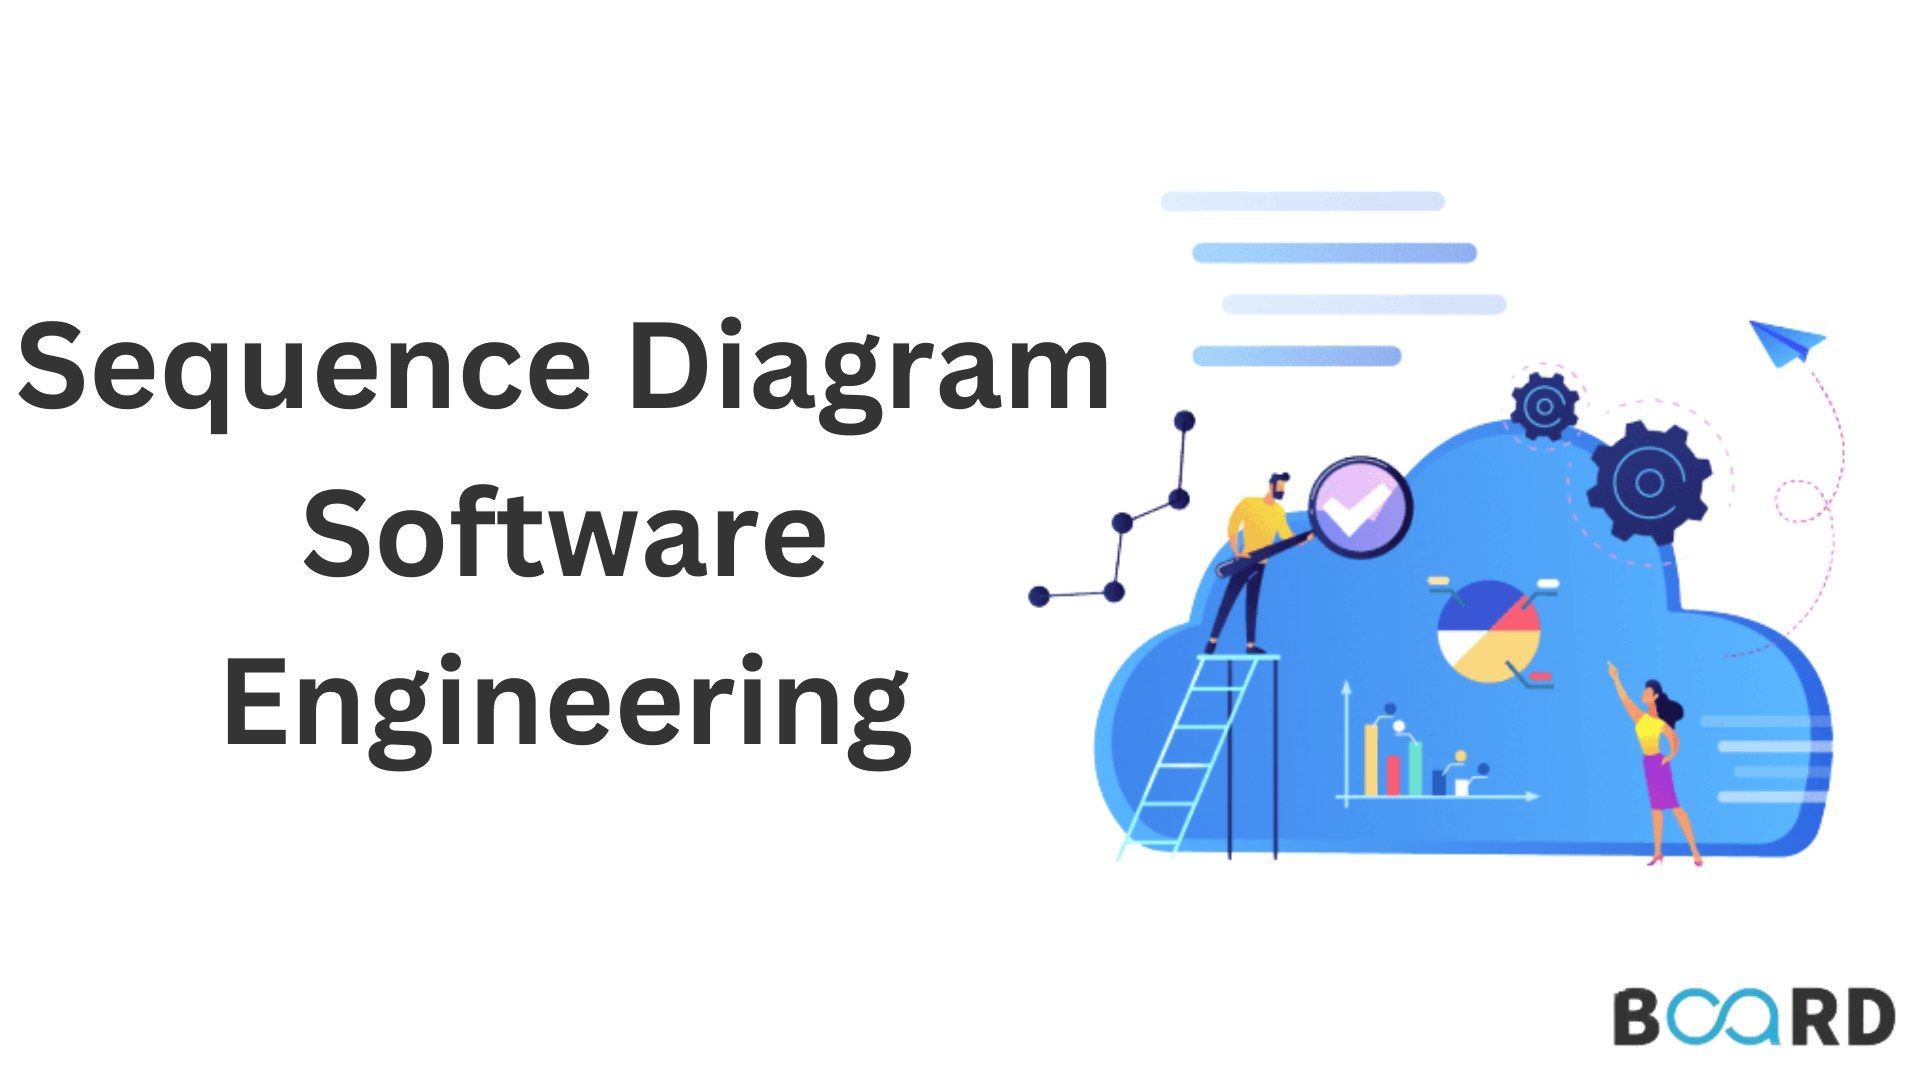 Learn About Sequence Diagrams in Software Engineering